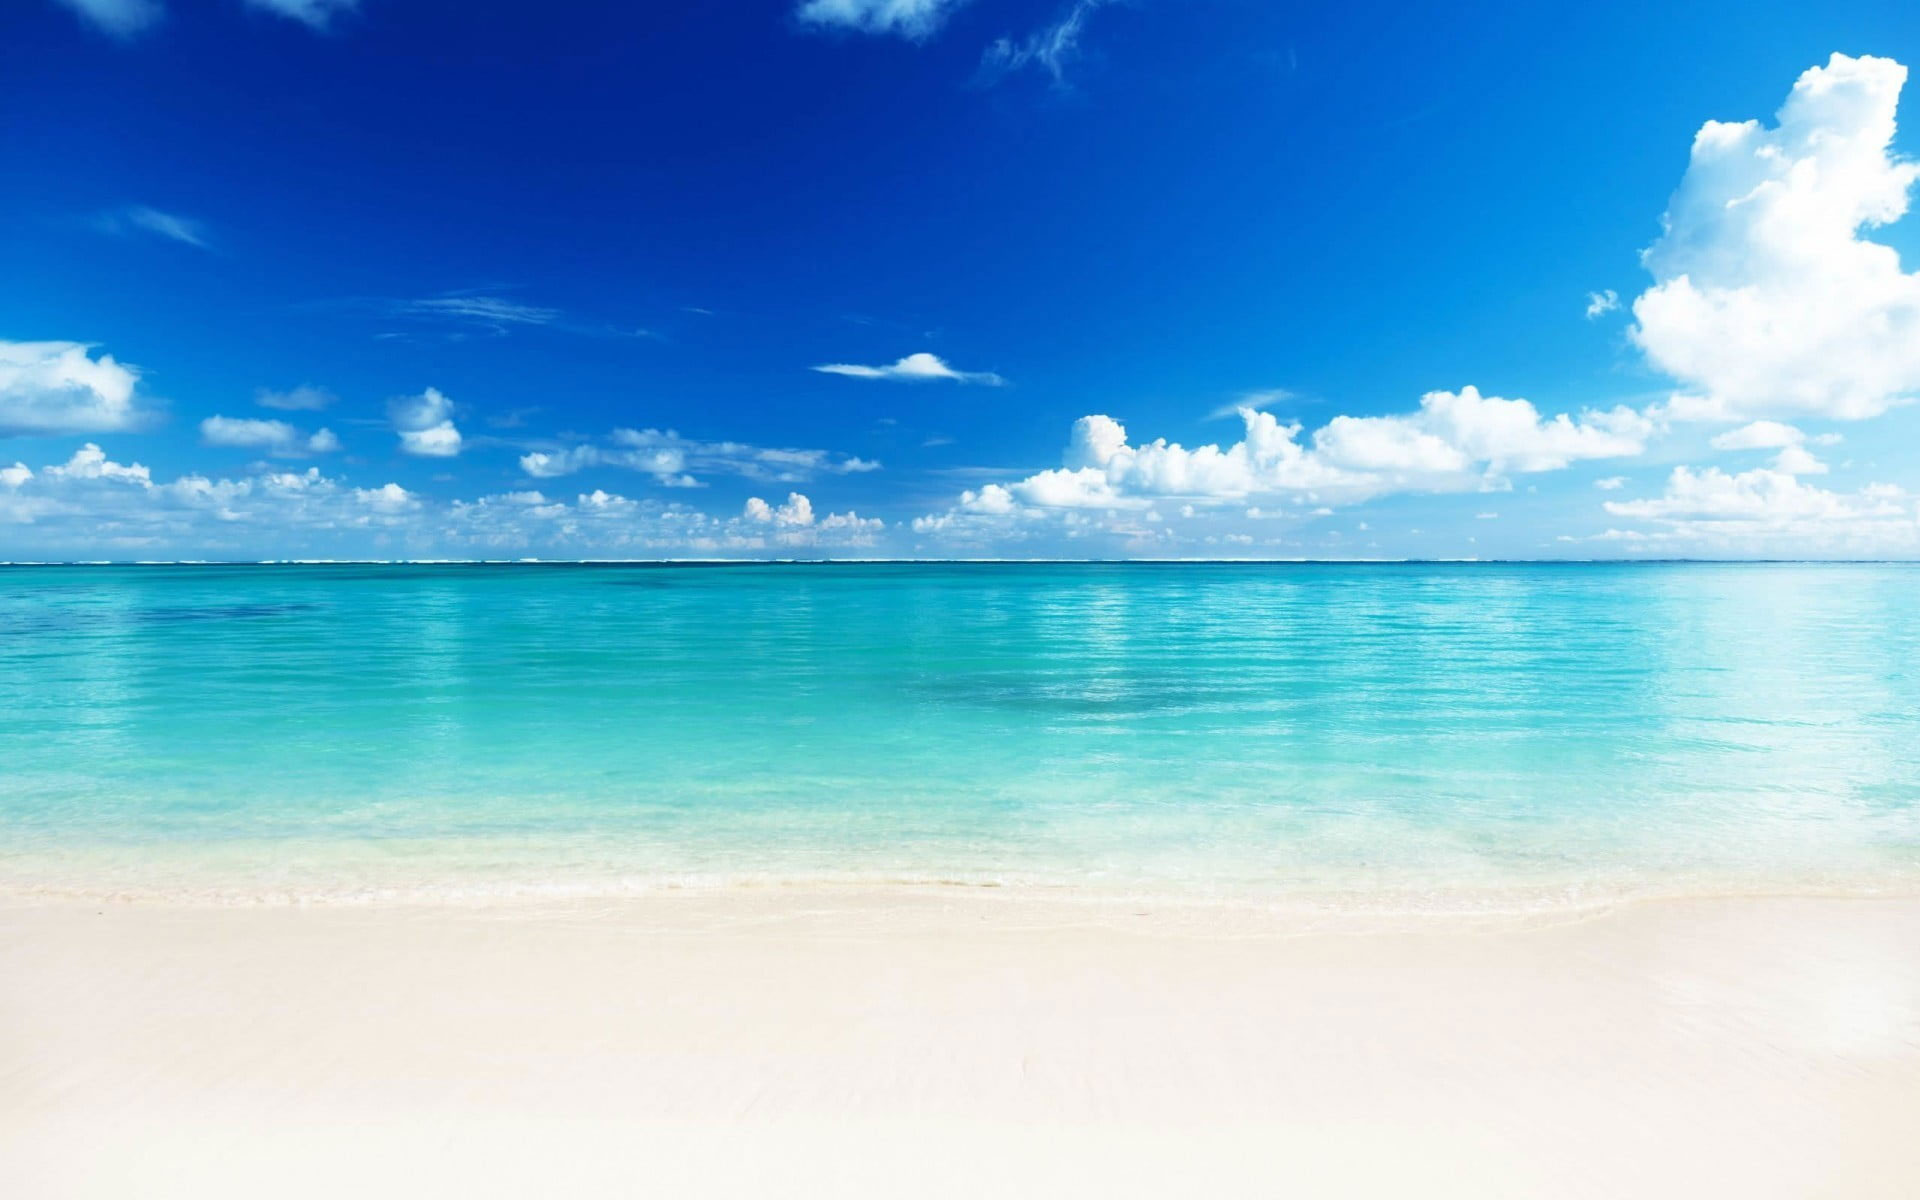 Beach during daytime wallpaper, landscape, tropical, sea, sky, tranquil